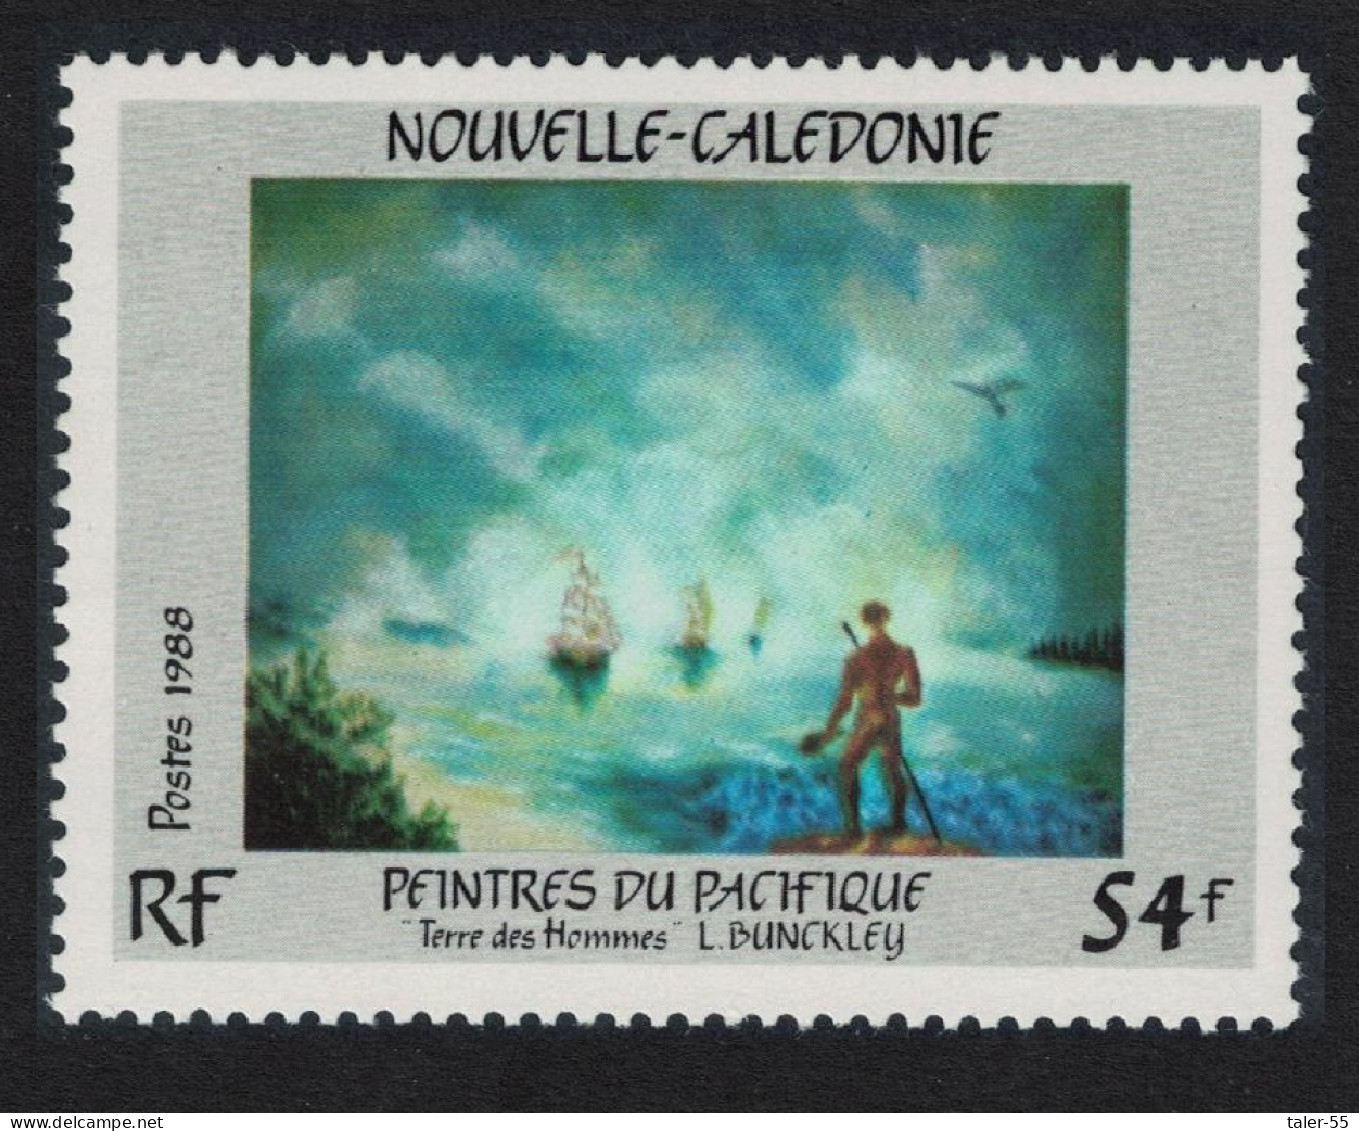 New Caledonia 'Terre Des Hommes' Painting By L. Bunckley 1988 MNH SG#852 - Ungebraucht